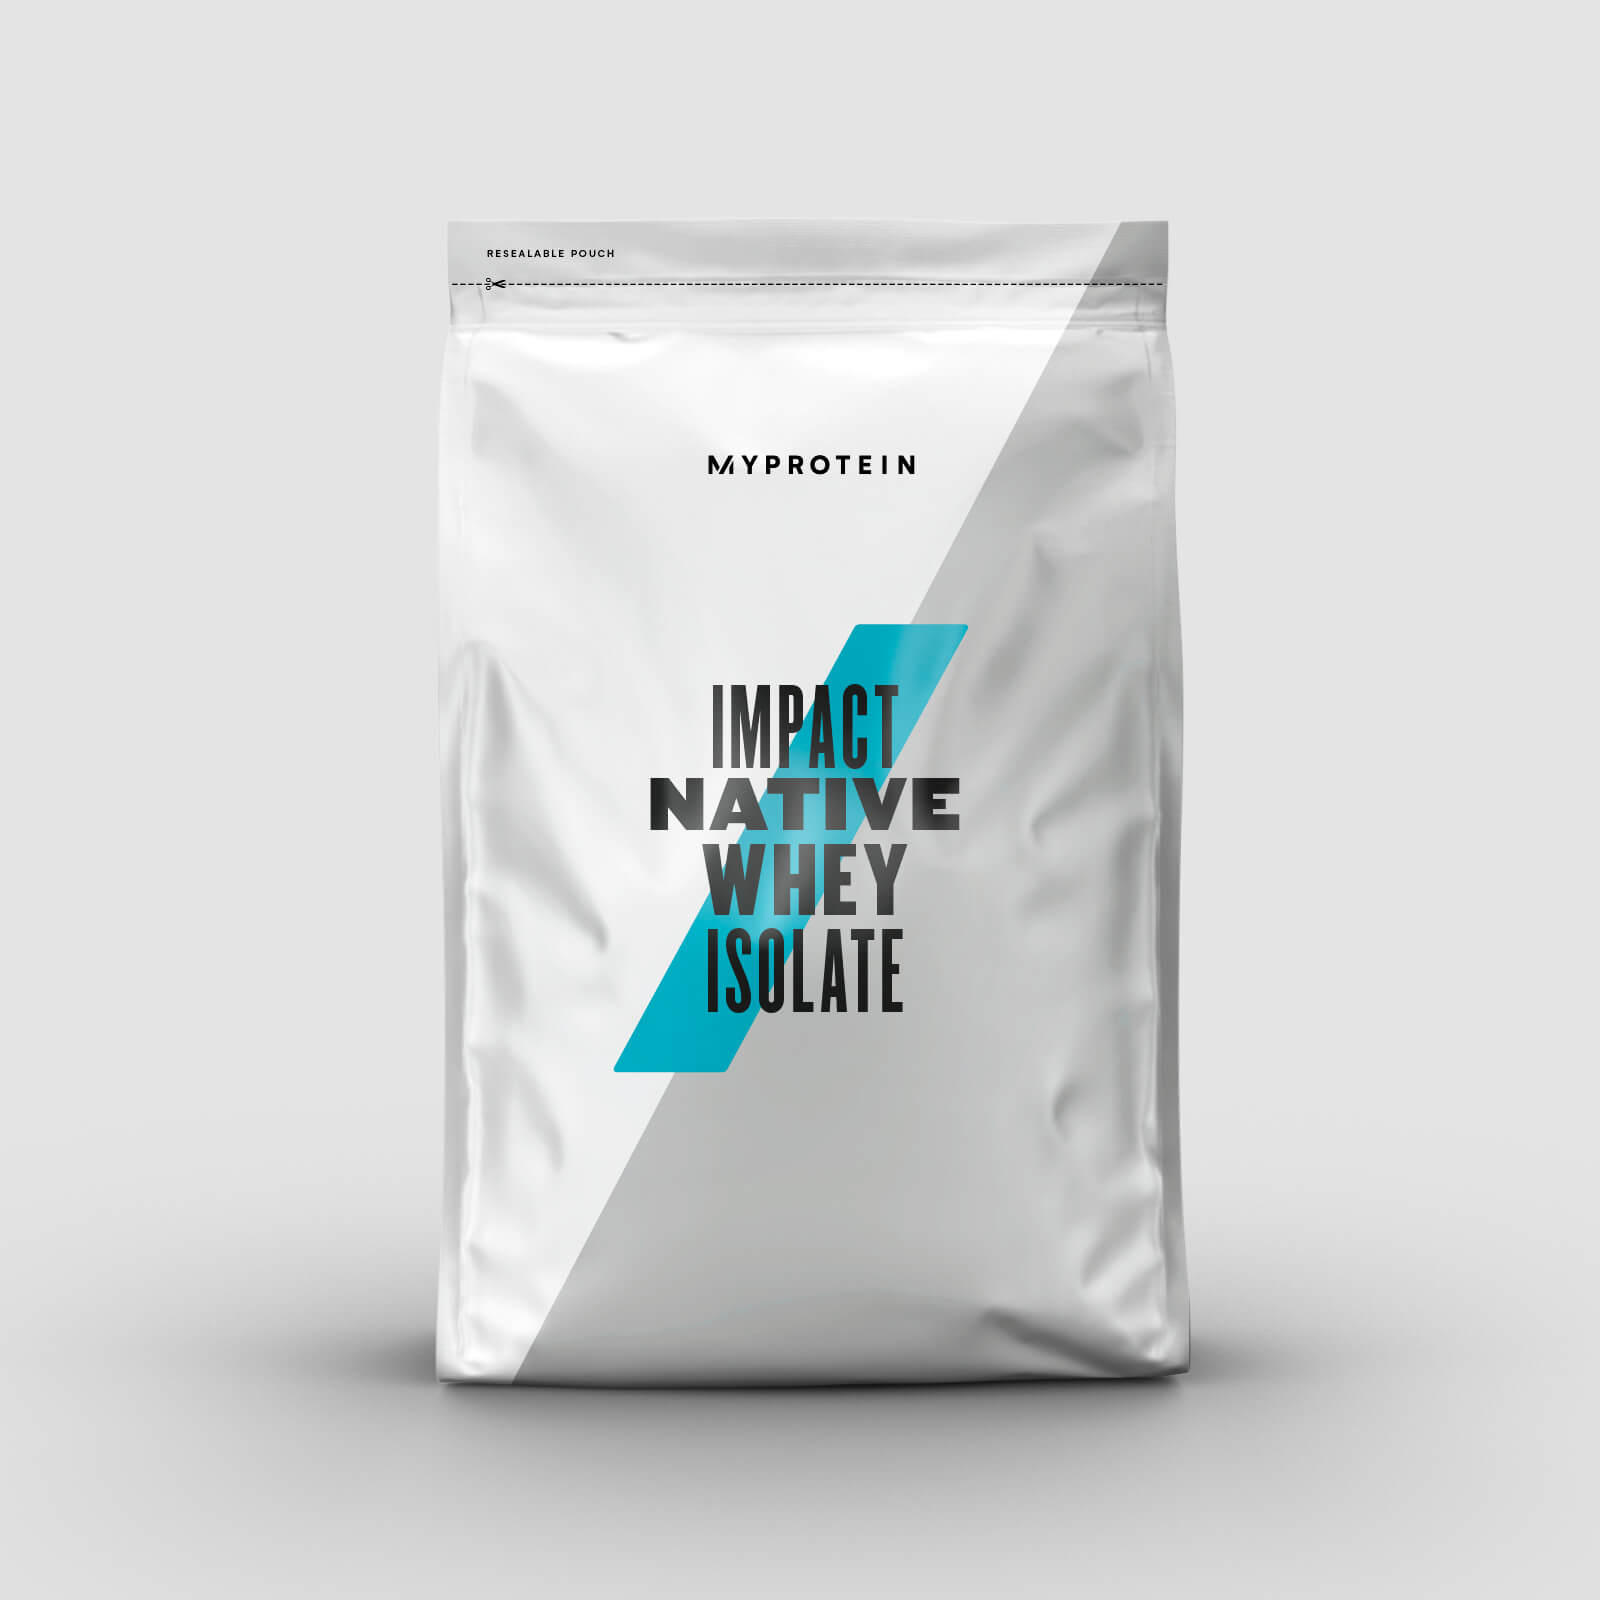 Myprotein Impact Native Whey Isolate - 1kg - New - Natural Strawberry